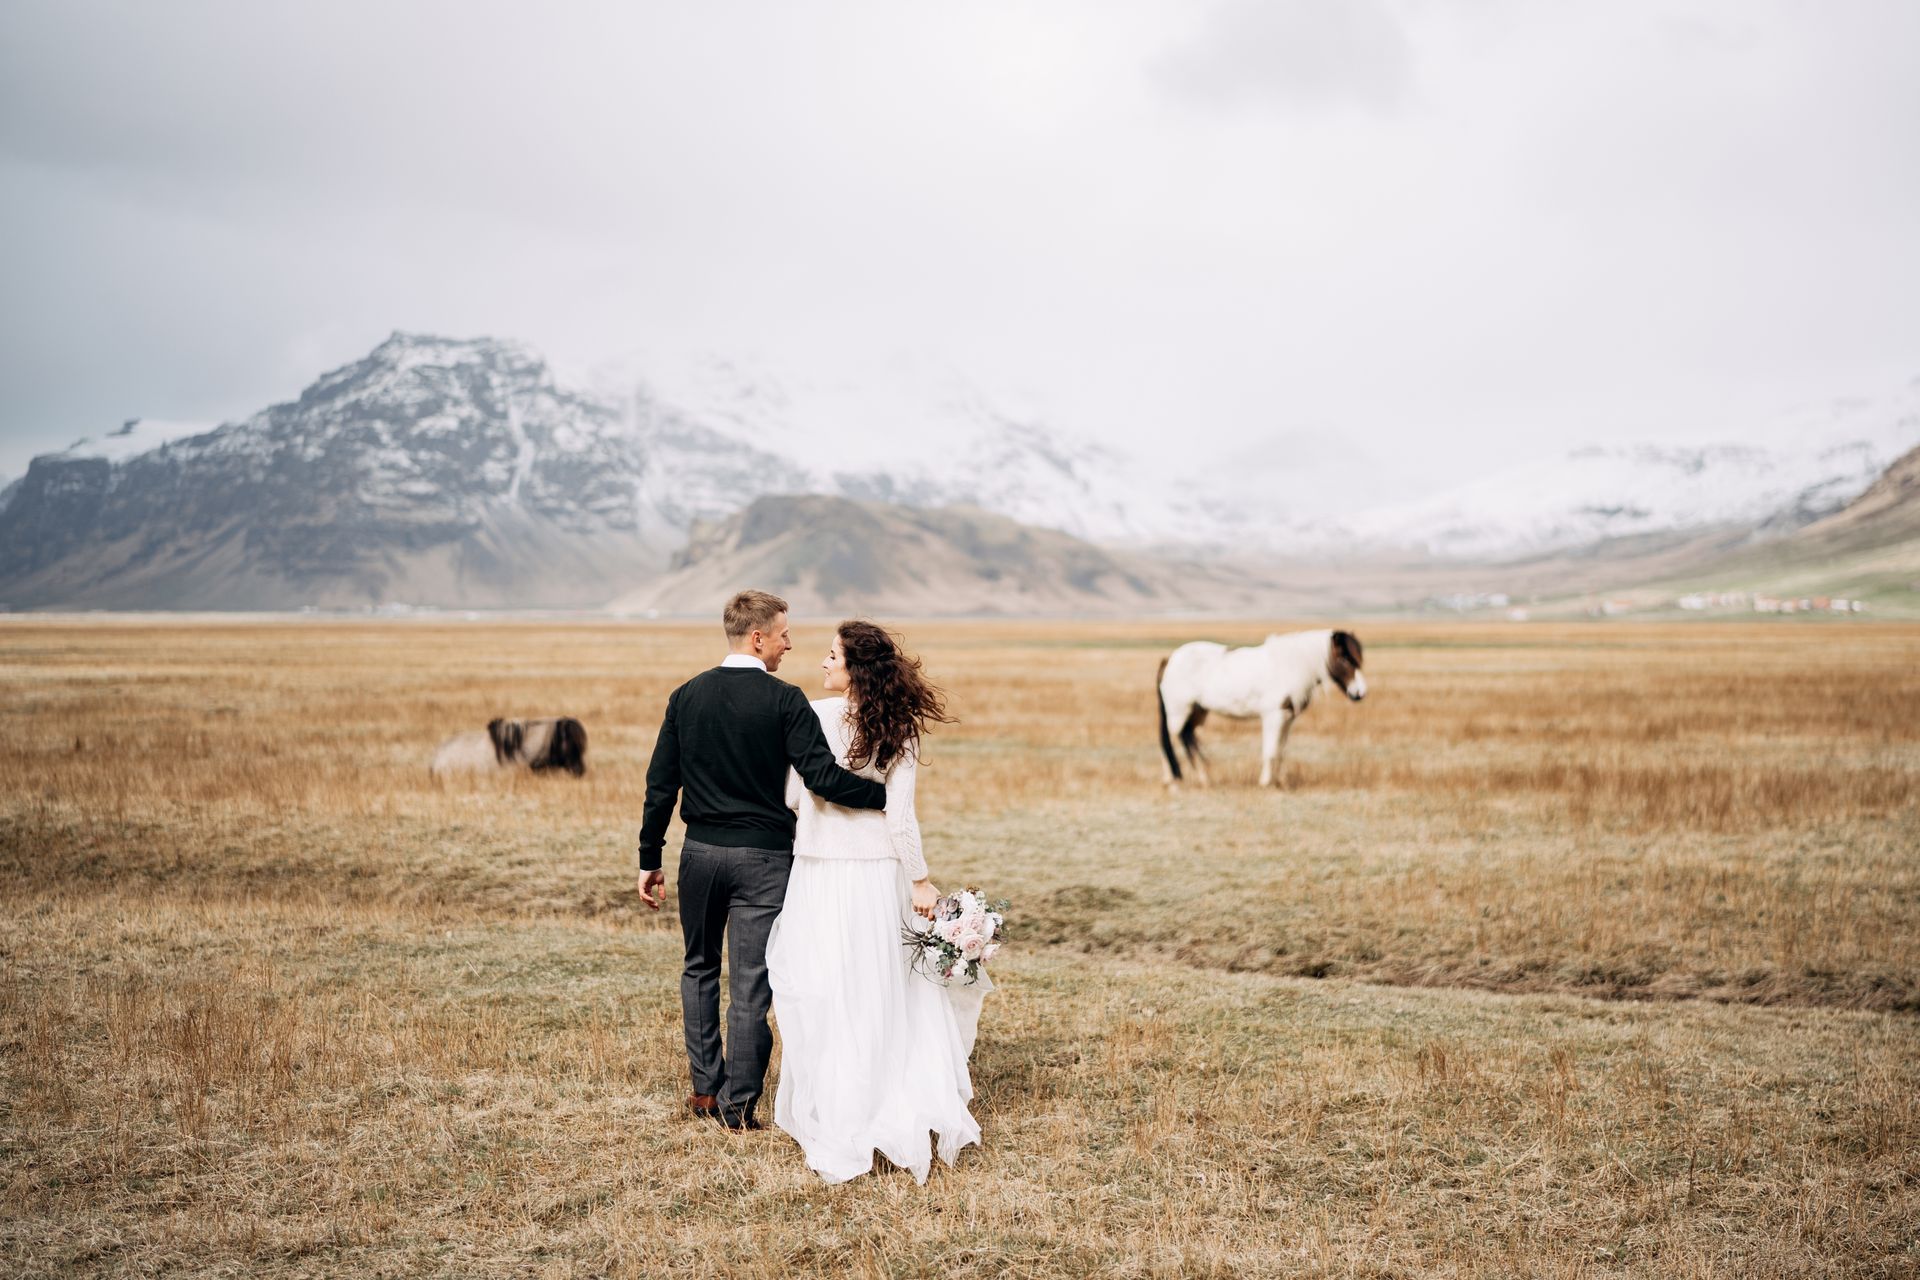 Amarillo atmosphere artistic wedding portrait captured by our photographer